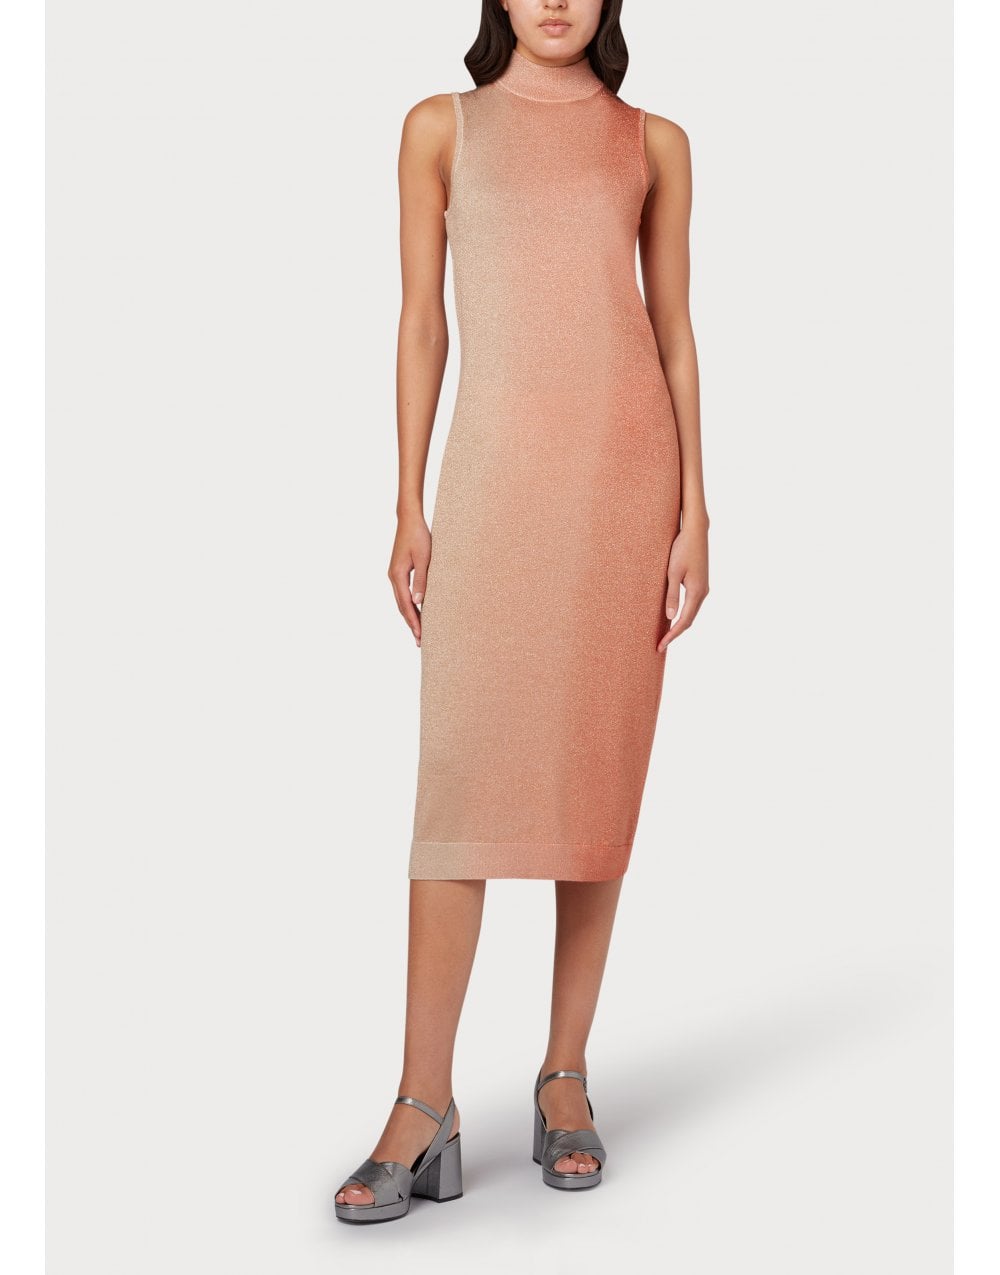 Paul Smith High Neck Ombre Sparkle Knitted Dress Col: 15 Goose Beak